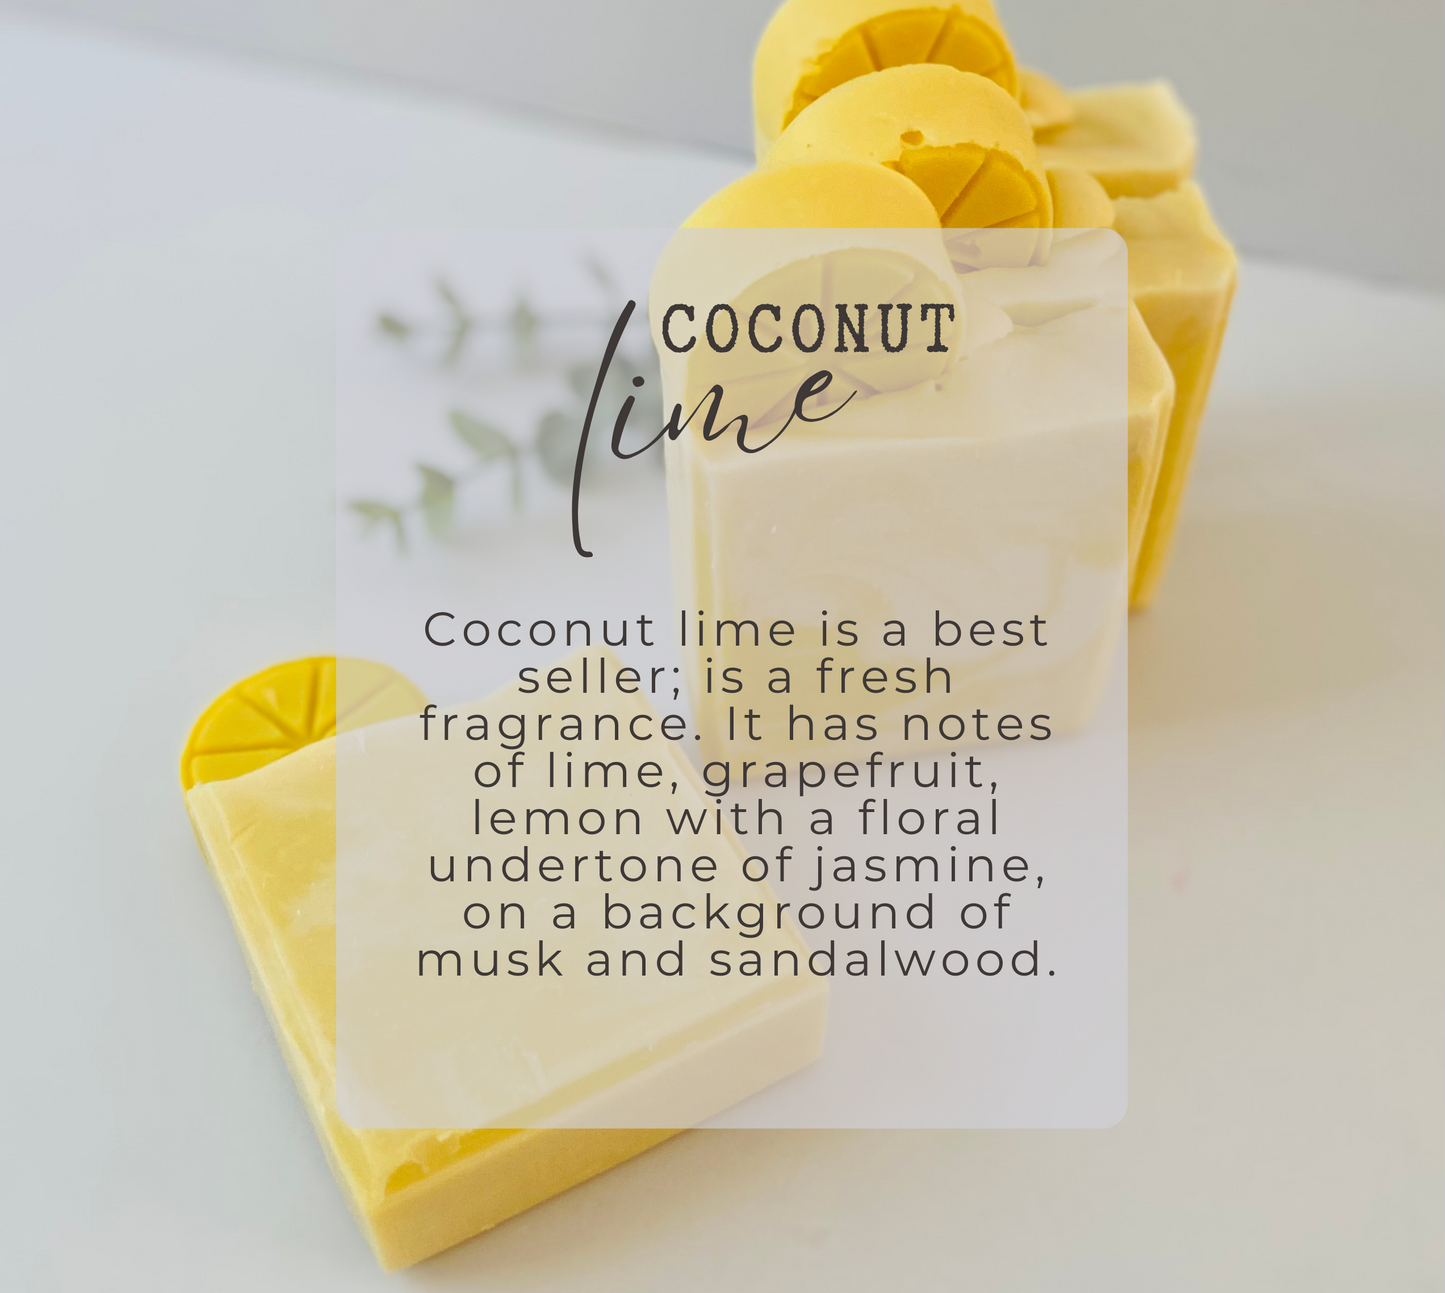 Coconut Lime Soap; this soap is scented with Coconut lime fragrance. This fragrance is a best seller; is a fresh fragrance. It has notes of lime, grapefruit, lemon with a floral undertone of jasmine, on a background of musk and sandalwood.